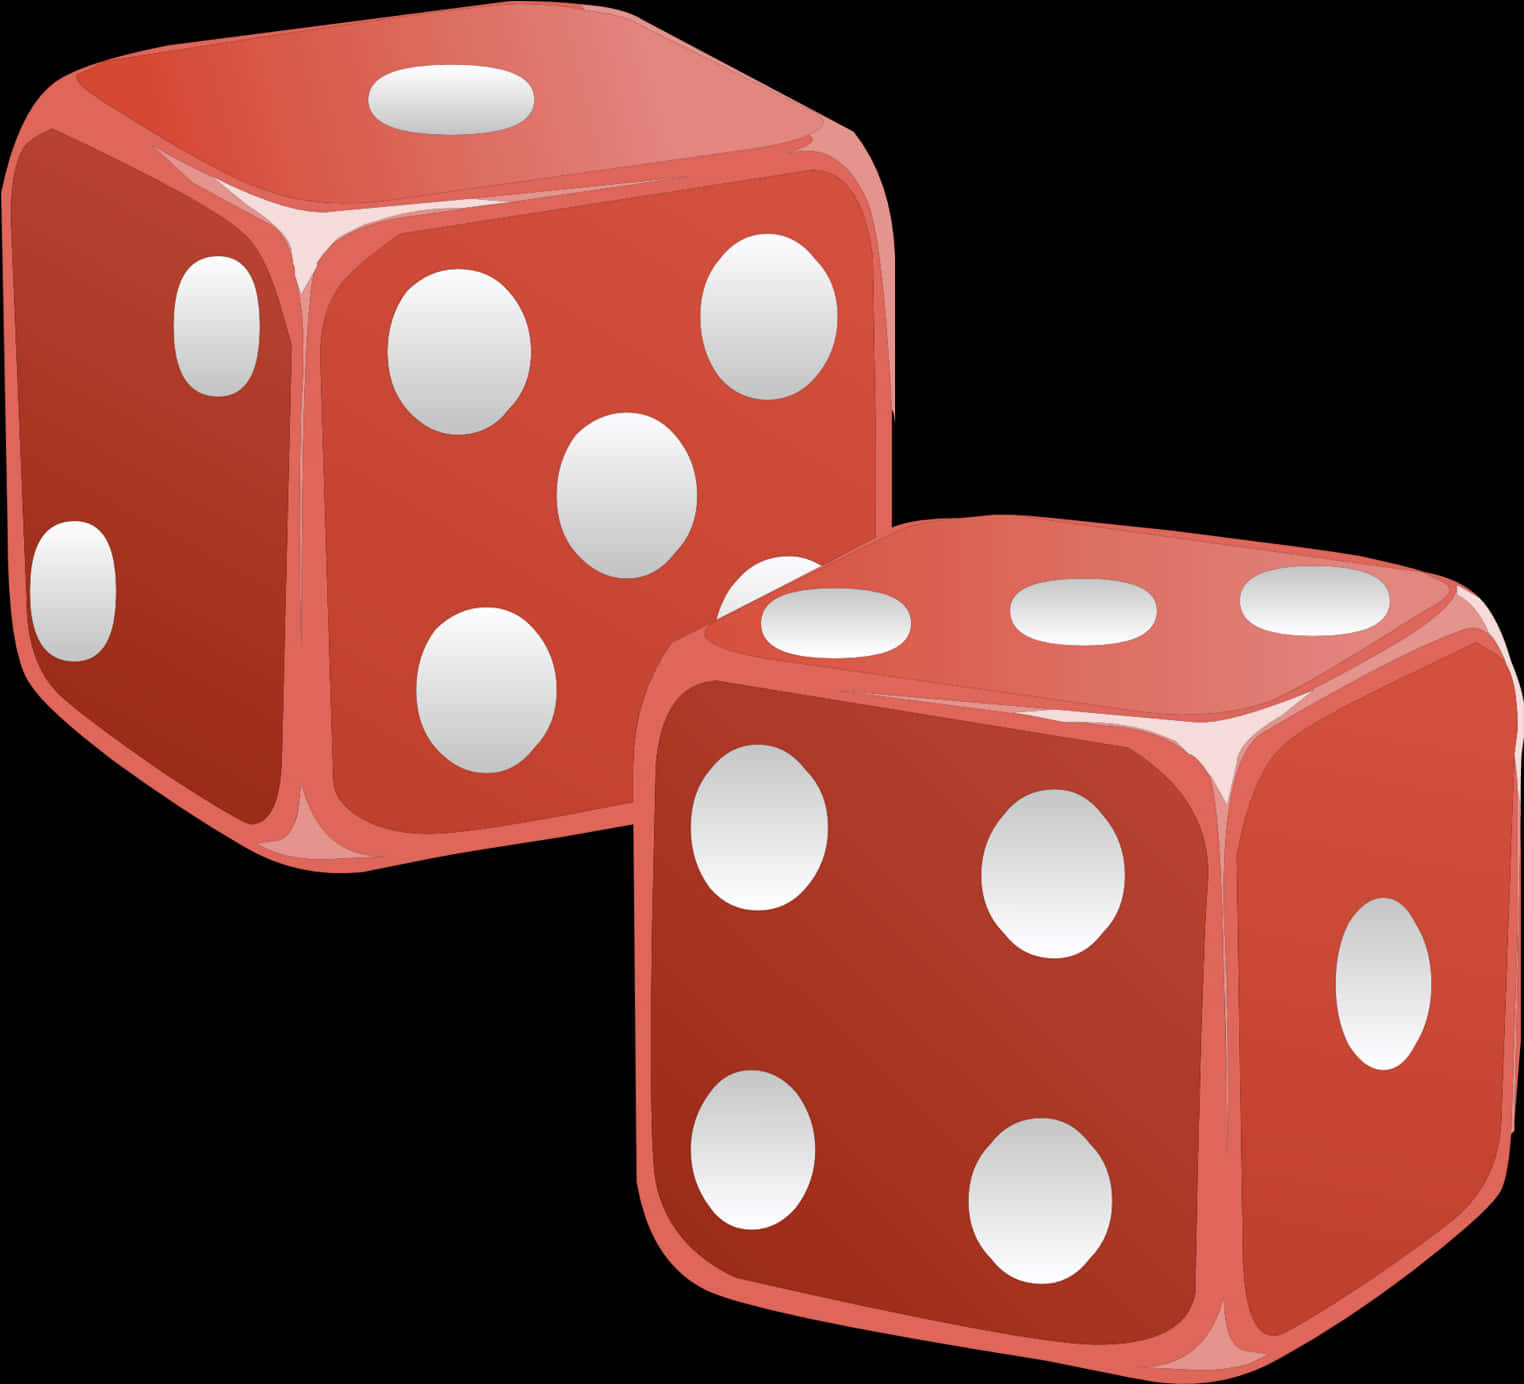 A Pair Of Red Dice With White Dots